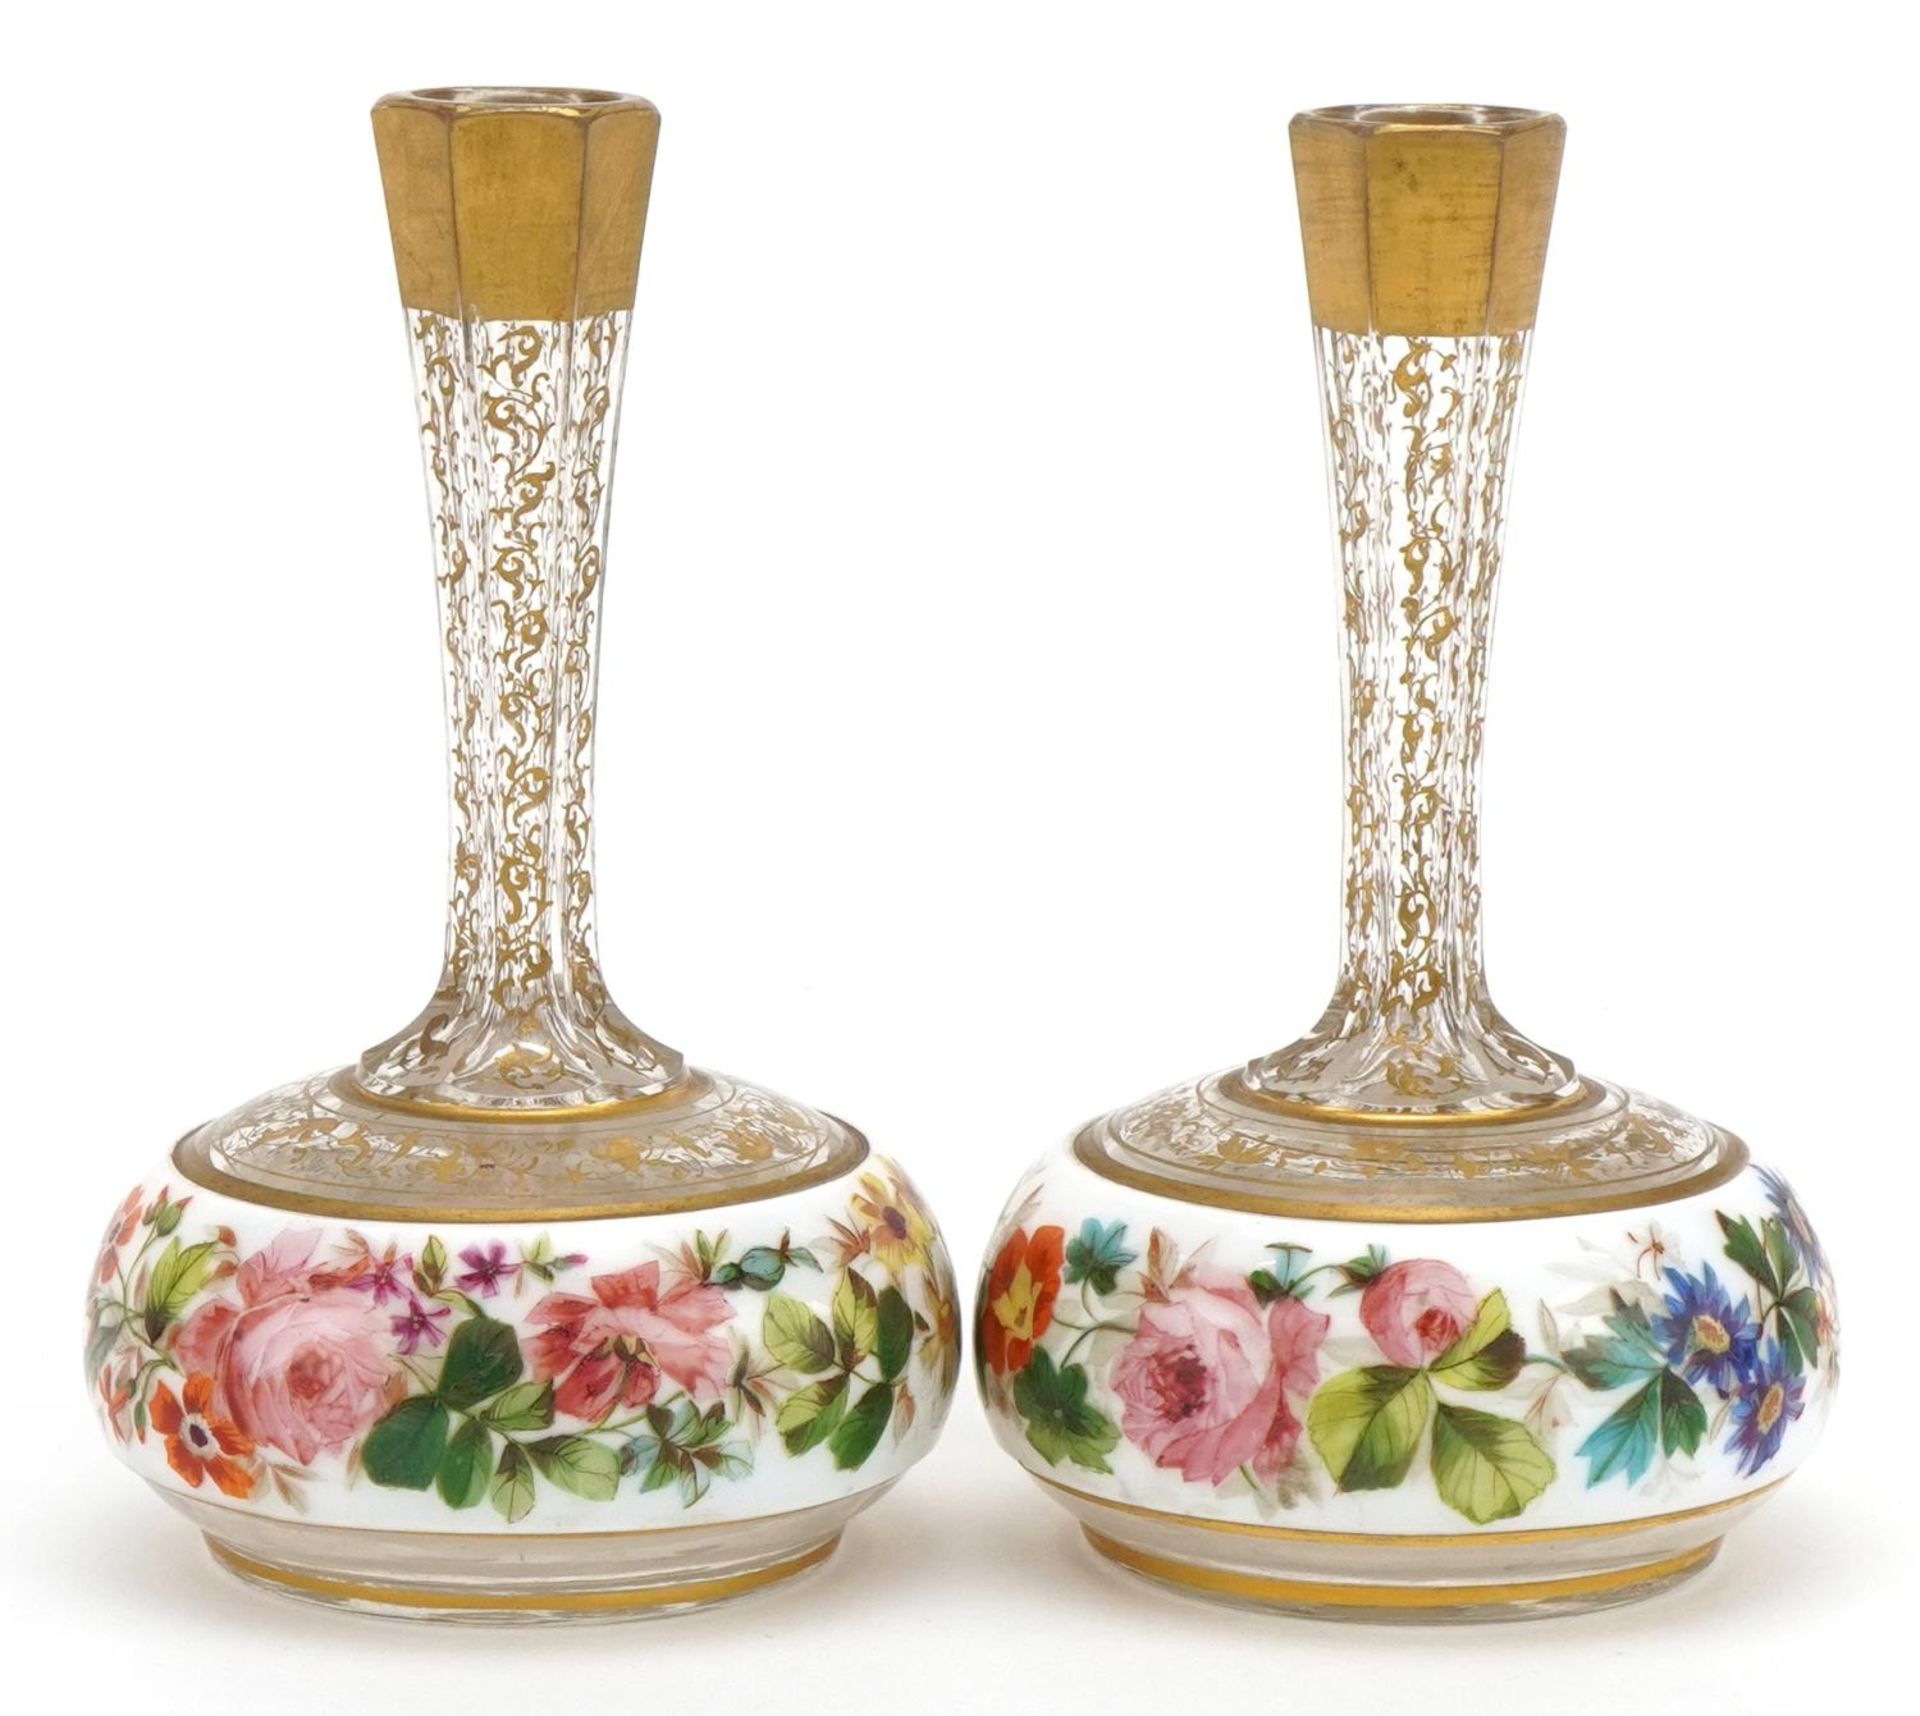 Pair of 19th century Bohemian white overlaid glass vases hand painted and gilded with flowers, - Image 2 of 3